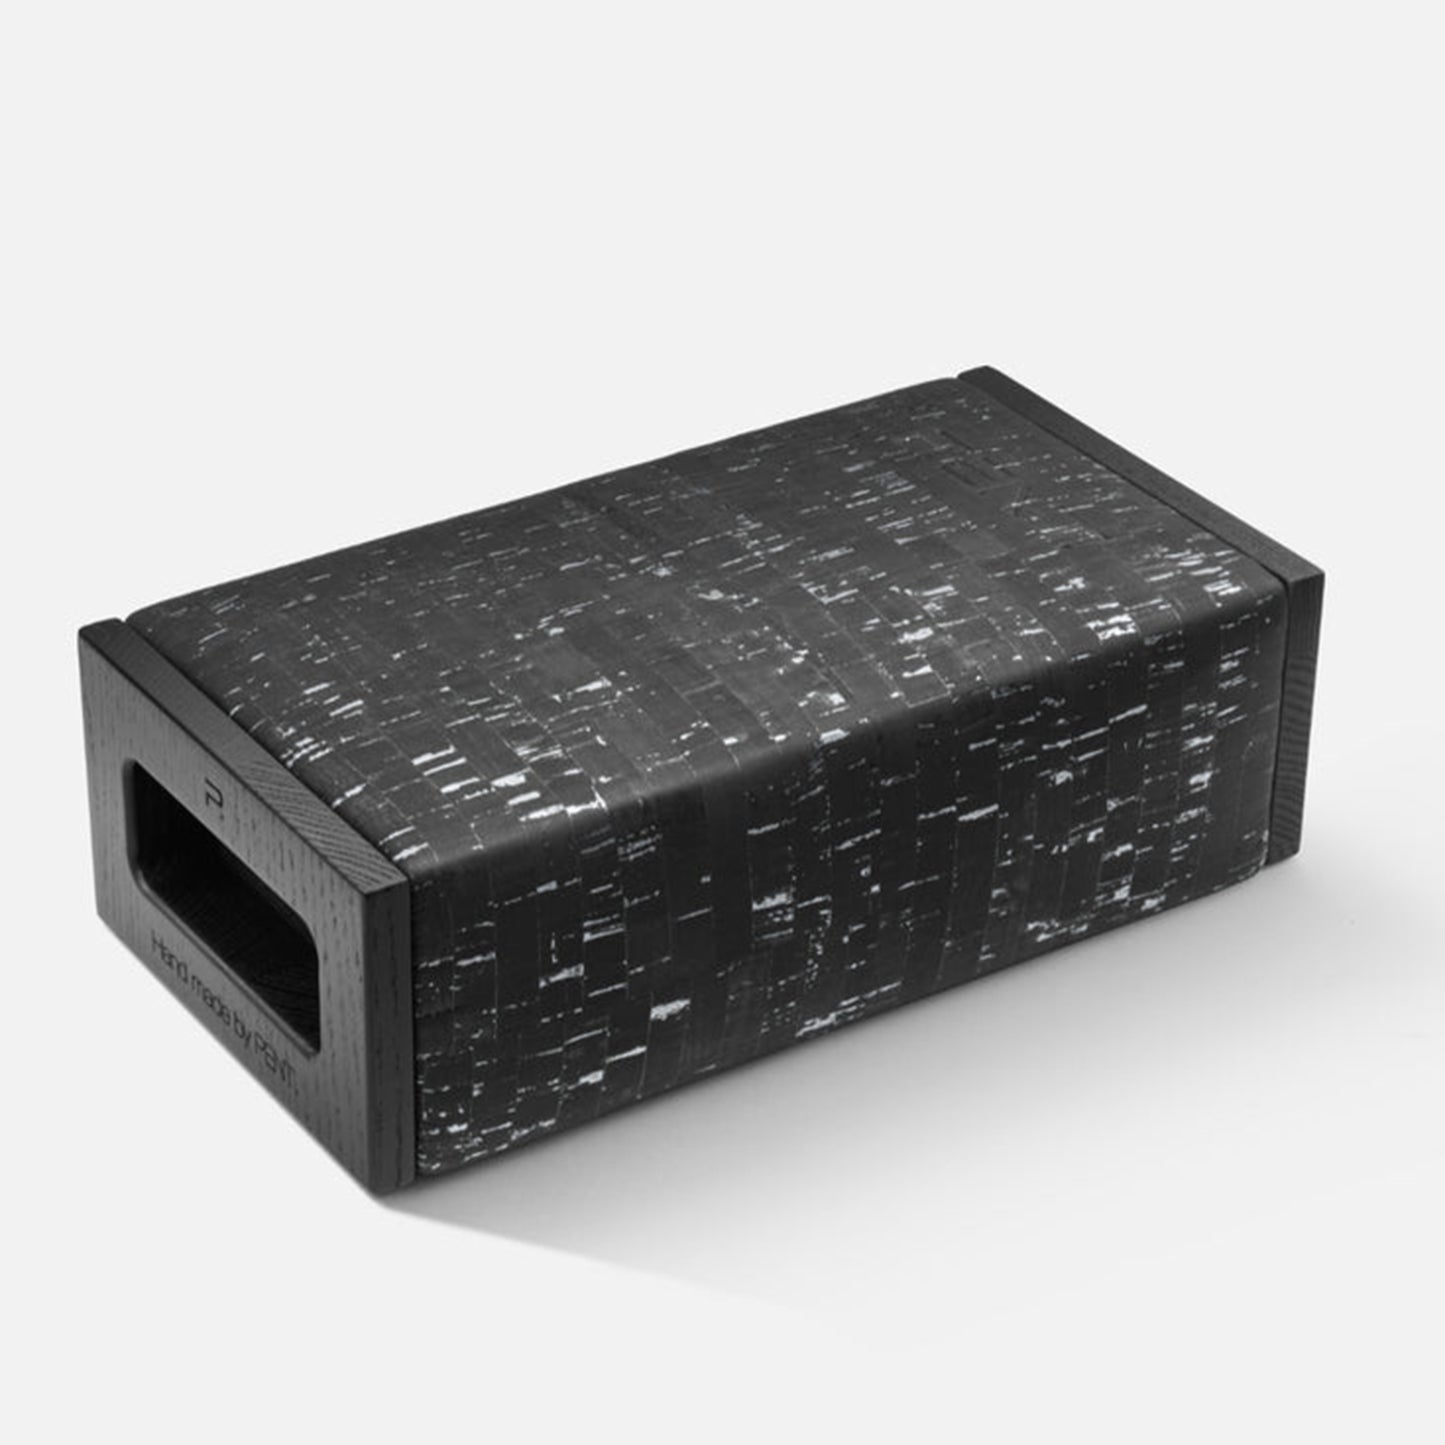 Cycling Bears Luxury Yoga Equipment: yoga block made from natural Cork and Italian Leather.